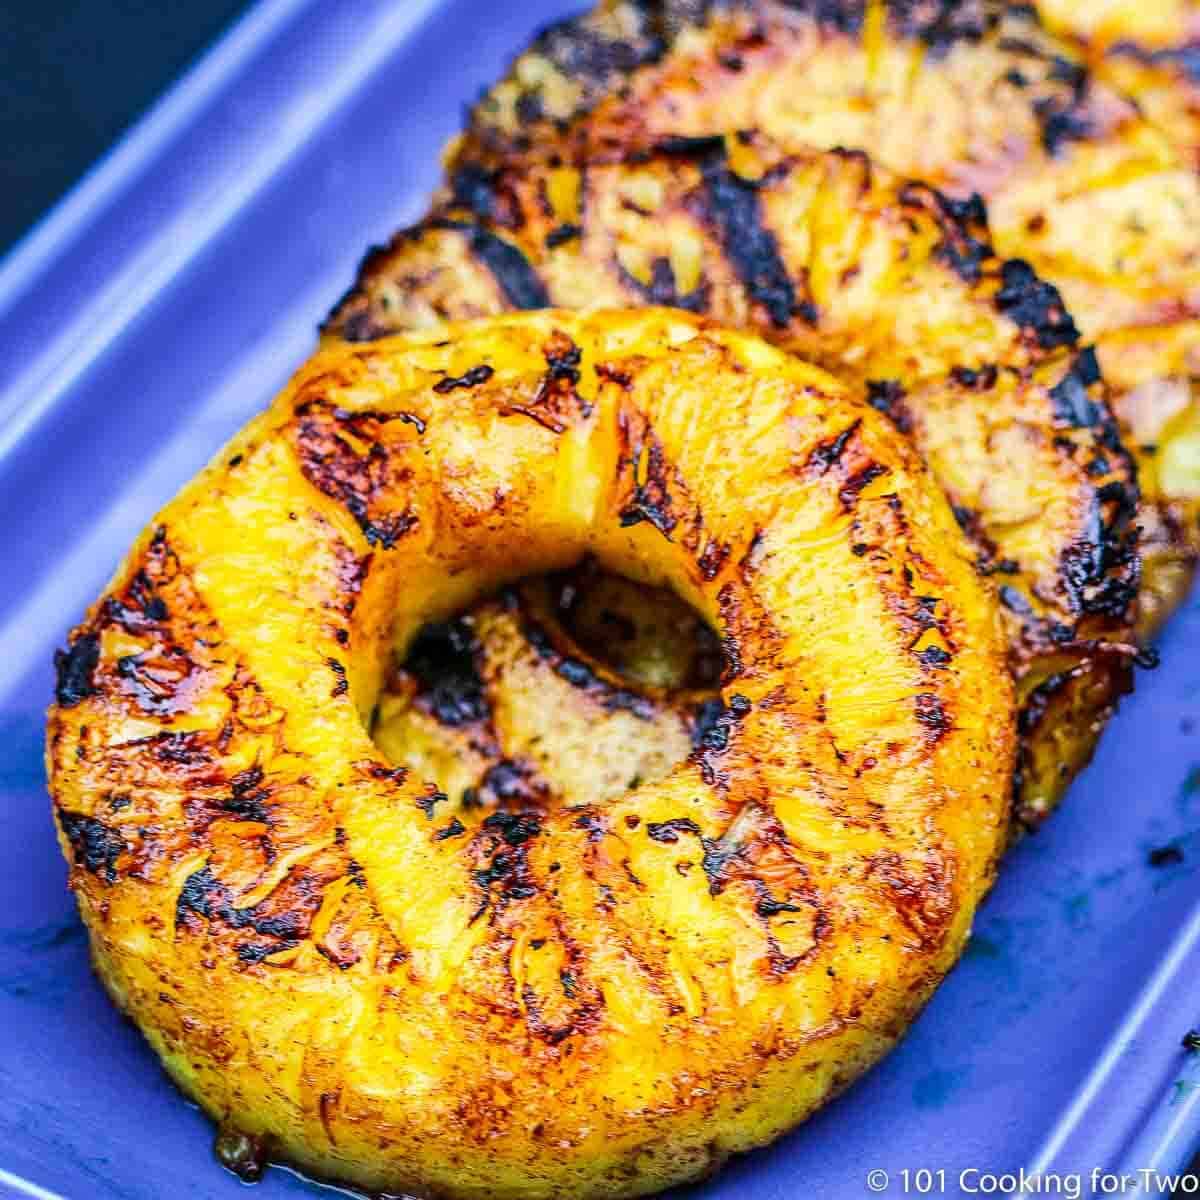 grilled pineapple on blue plate